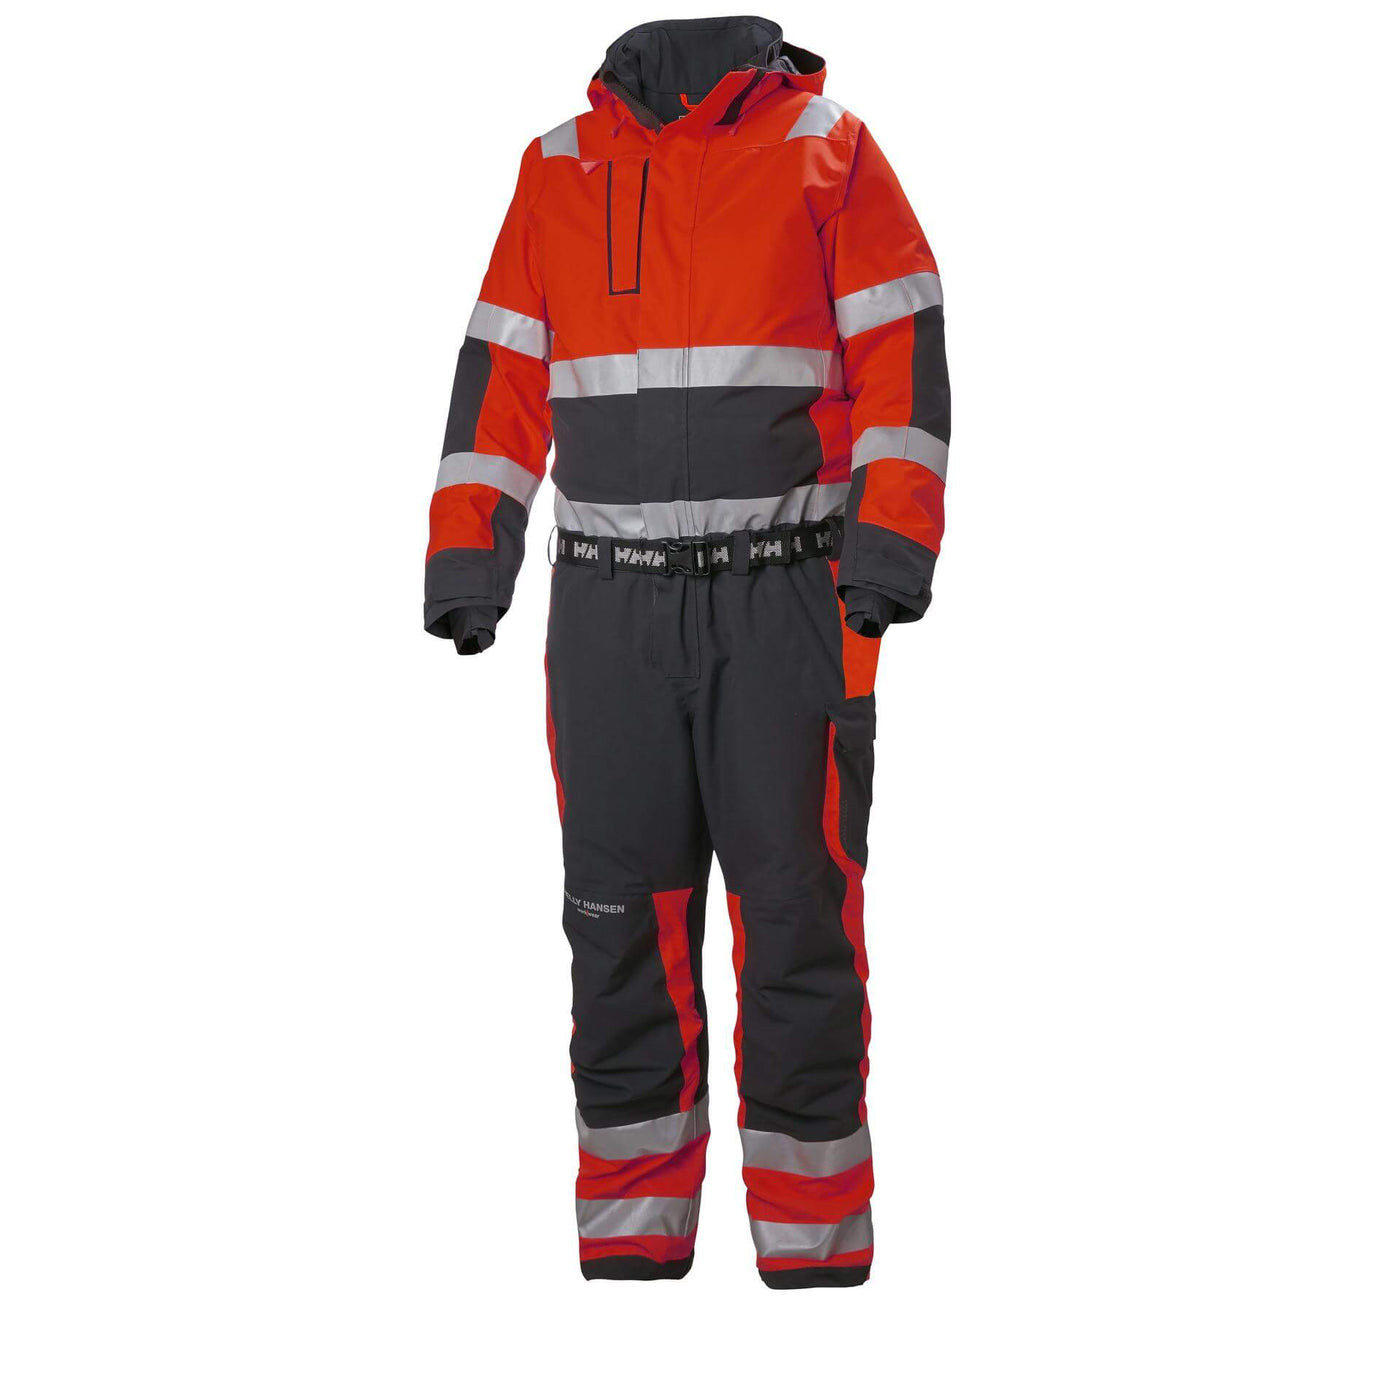 Helly Hansen Alna 2.0 Hi Vis Insulated Winter Overalls Suit Red 1 Front #colour_red